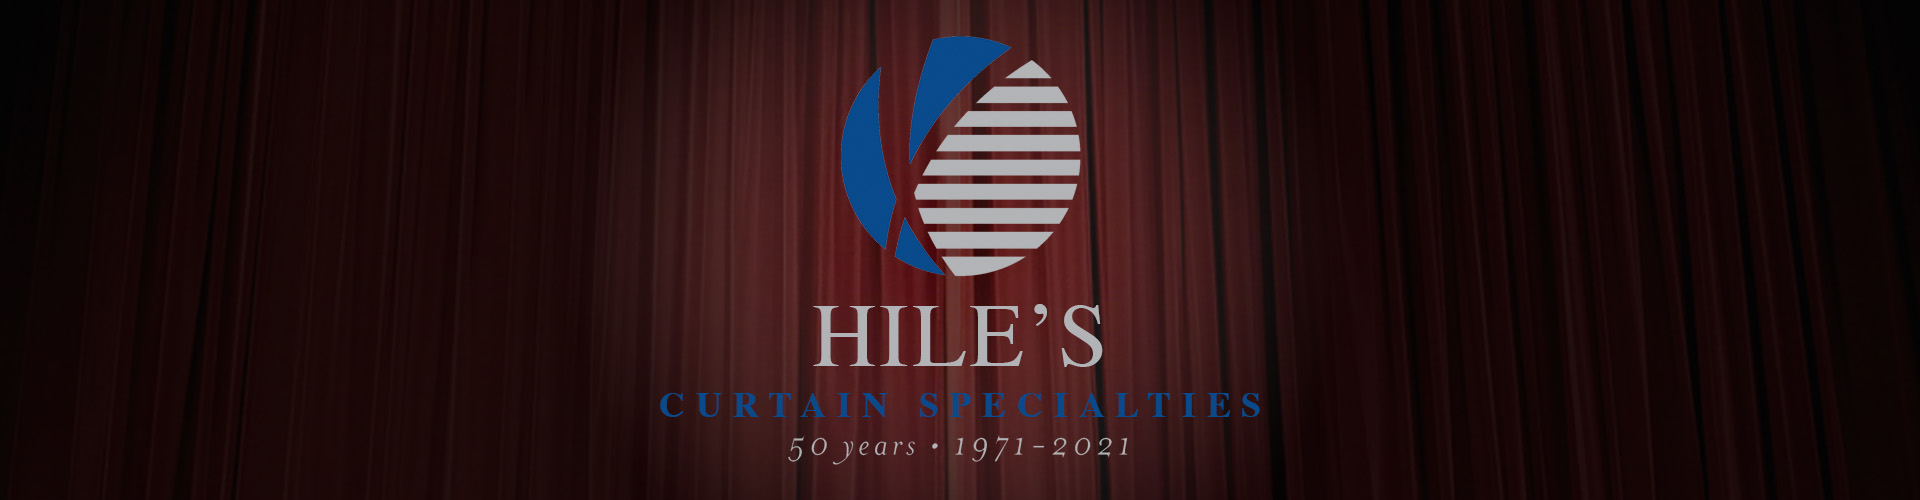 Hiles Curtains Specialties